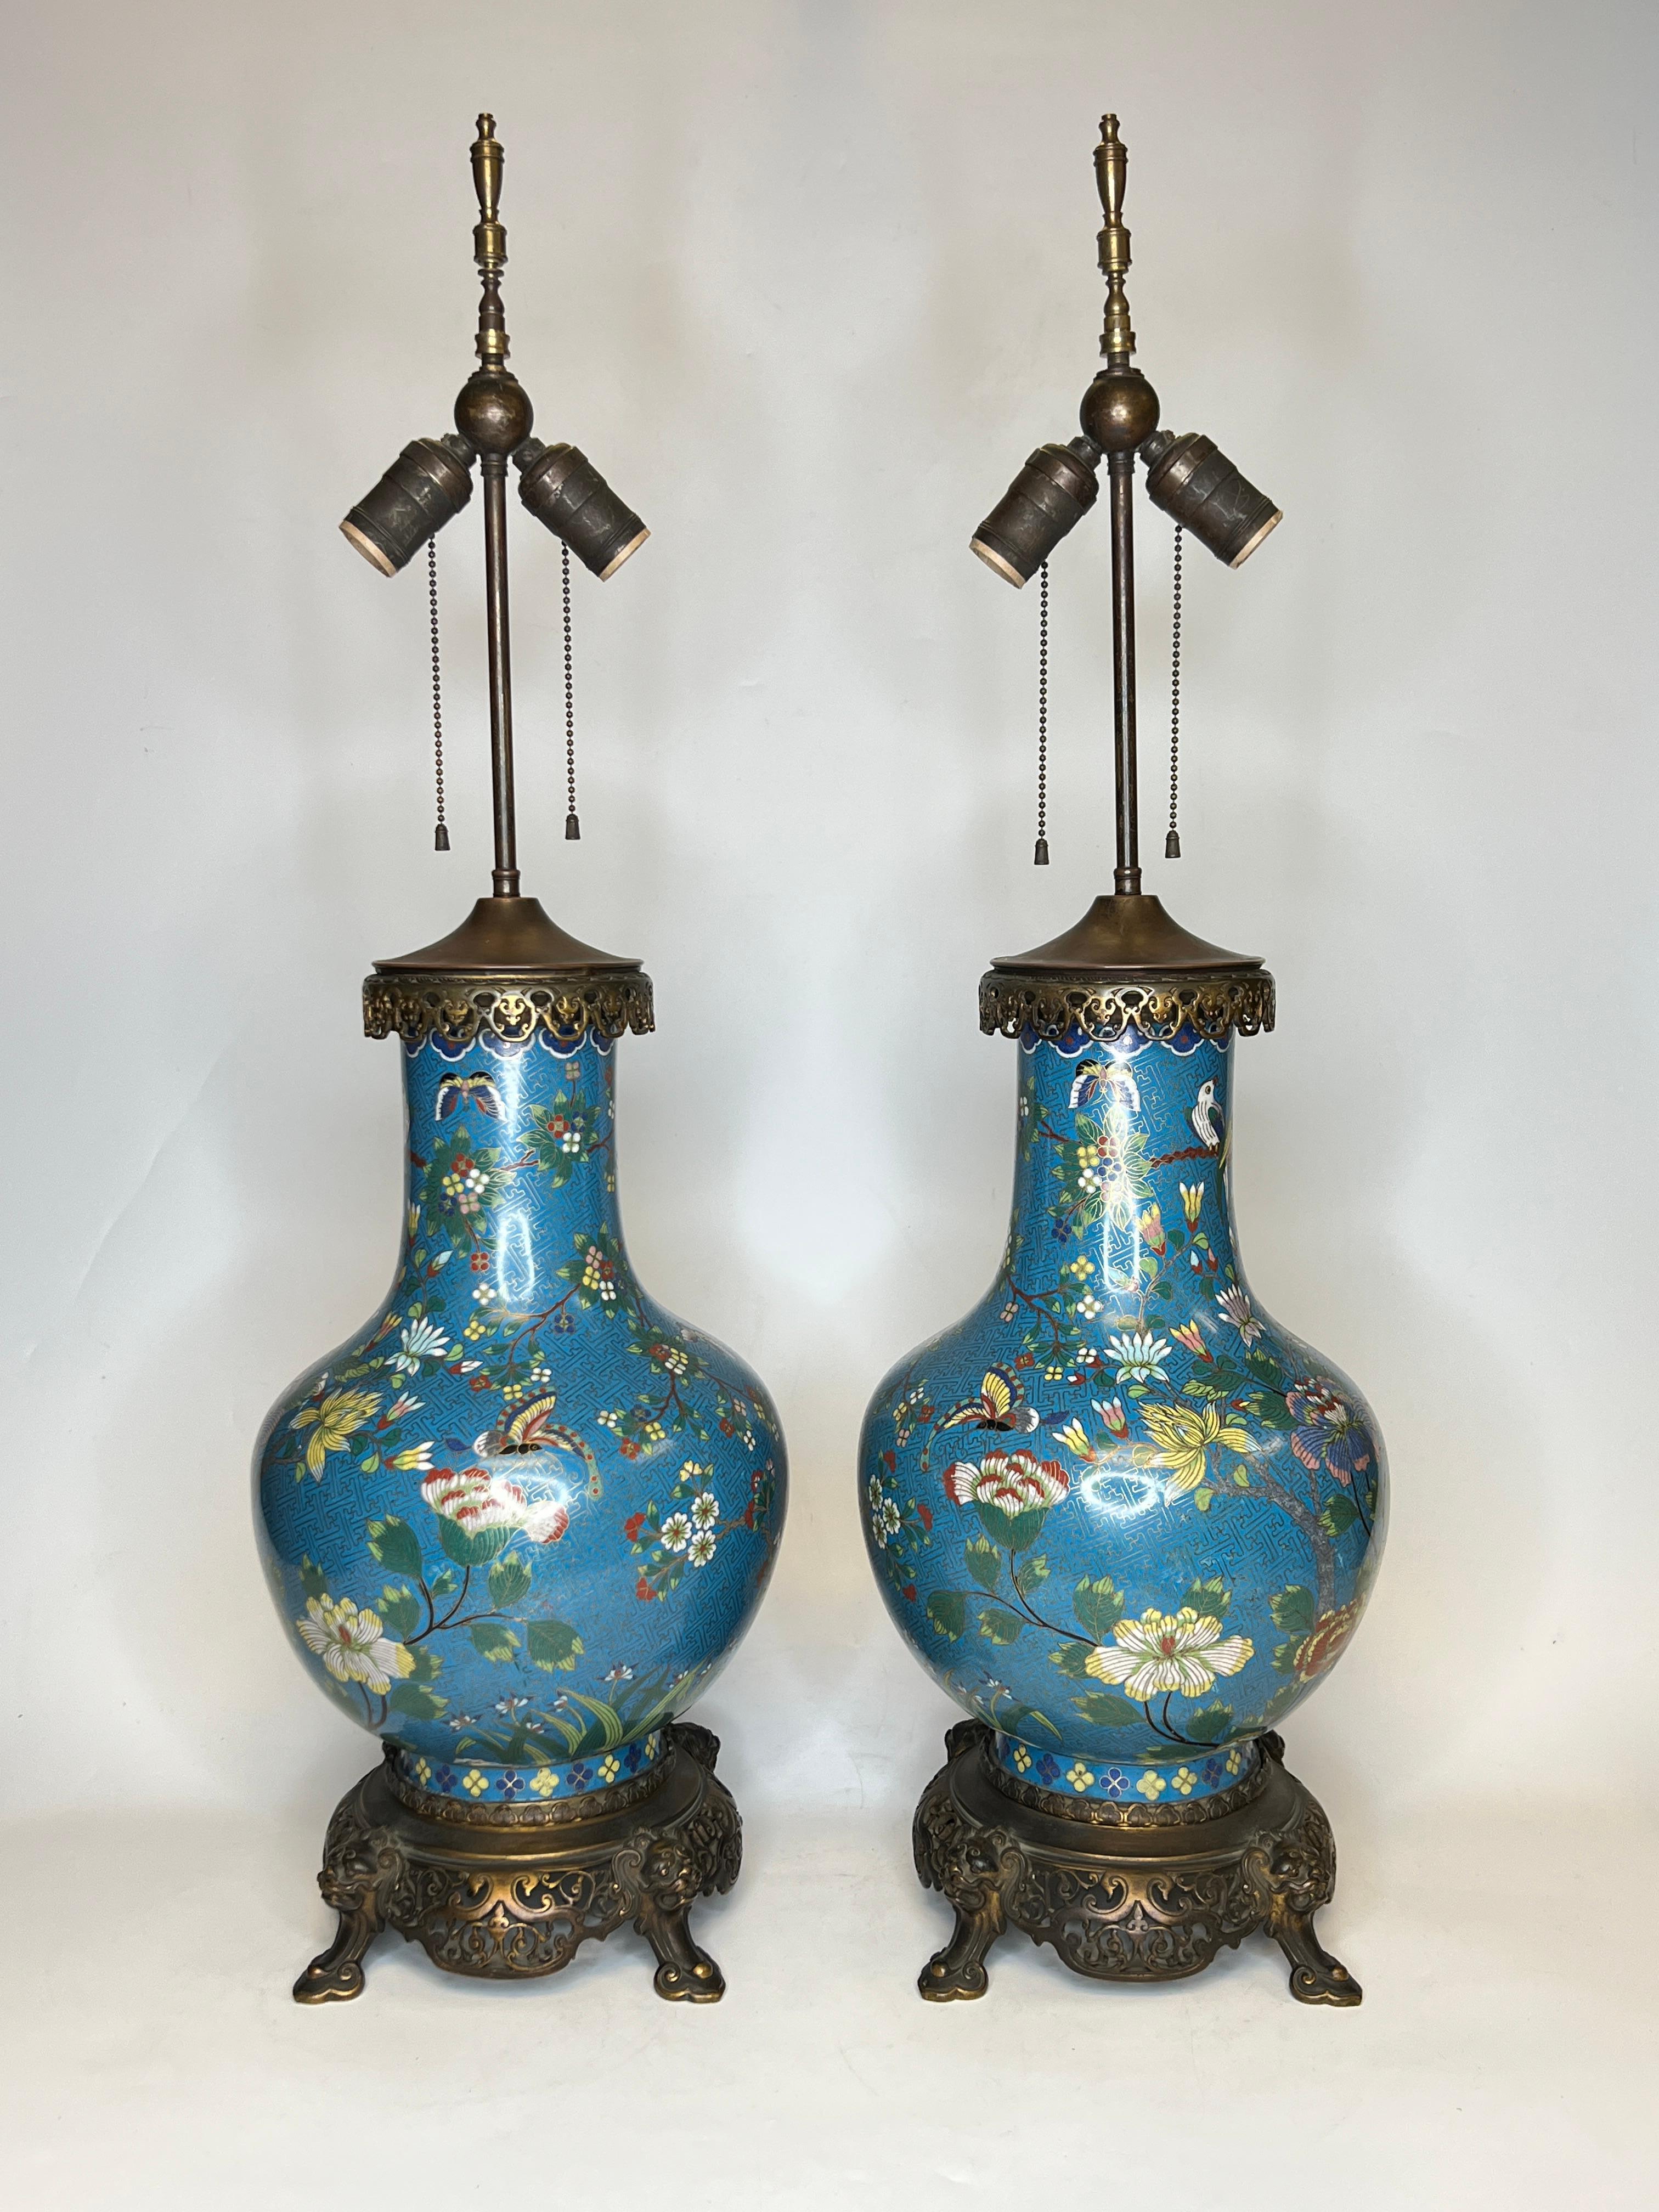 Cloissoné Pair of French Bronze Mounted Chinese Cloisonne Table Lamps